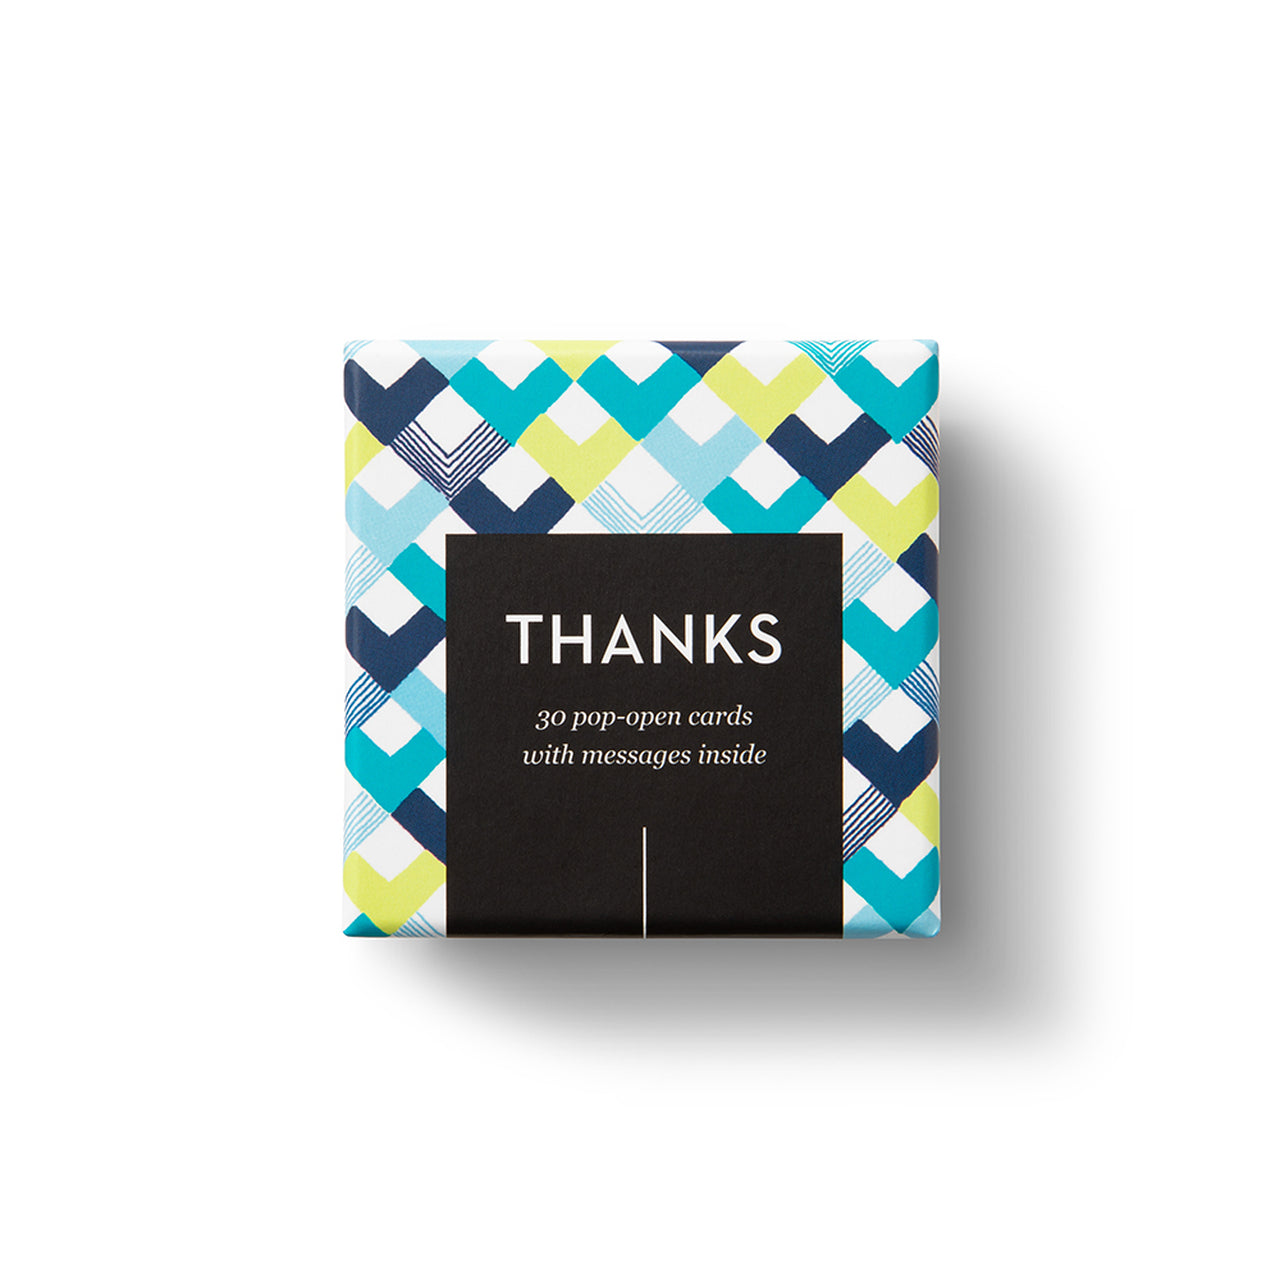 Thanks - Surprise Inspiration Cards